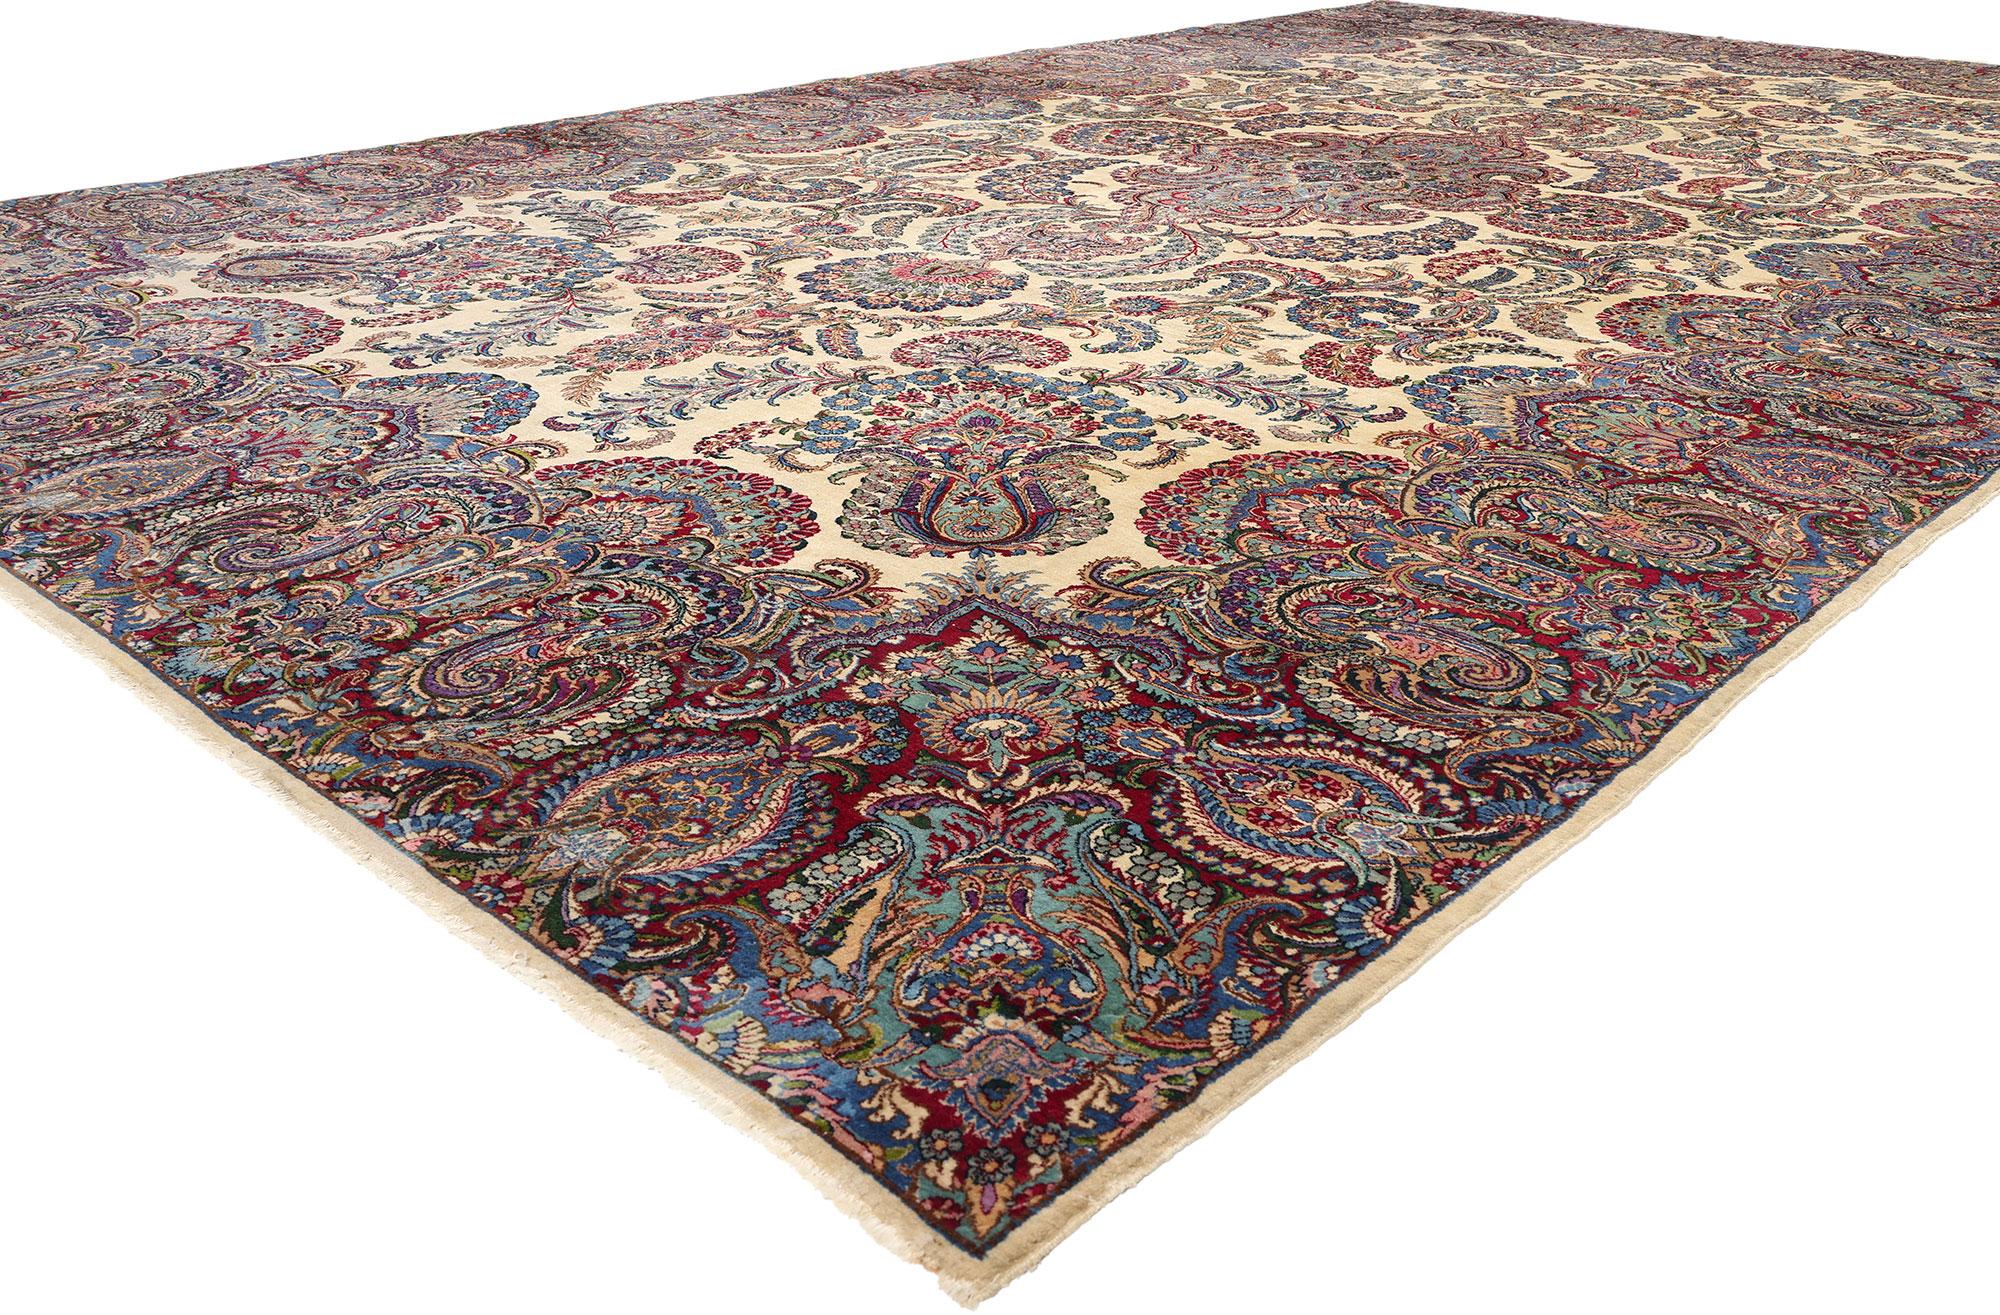 78750 Oversized Antique Persian Kerman Rug, 11'08 x 19'05. Oversized Persian Kerman rugs refer to large-scale rugs originating from the city of Kerman in Iran. These rugs are characterized by their generous dimensions, typically exceeding standard